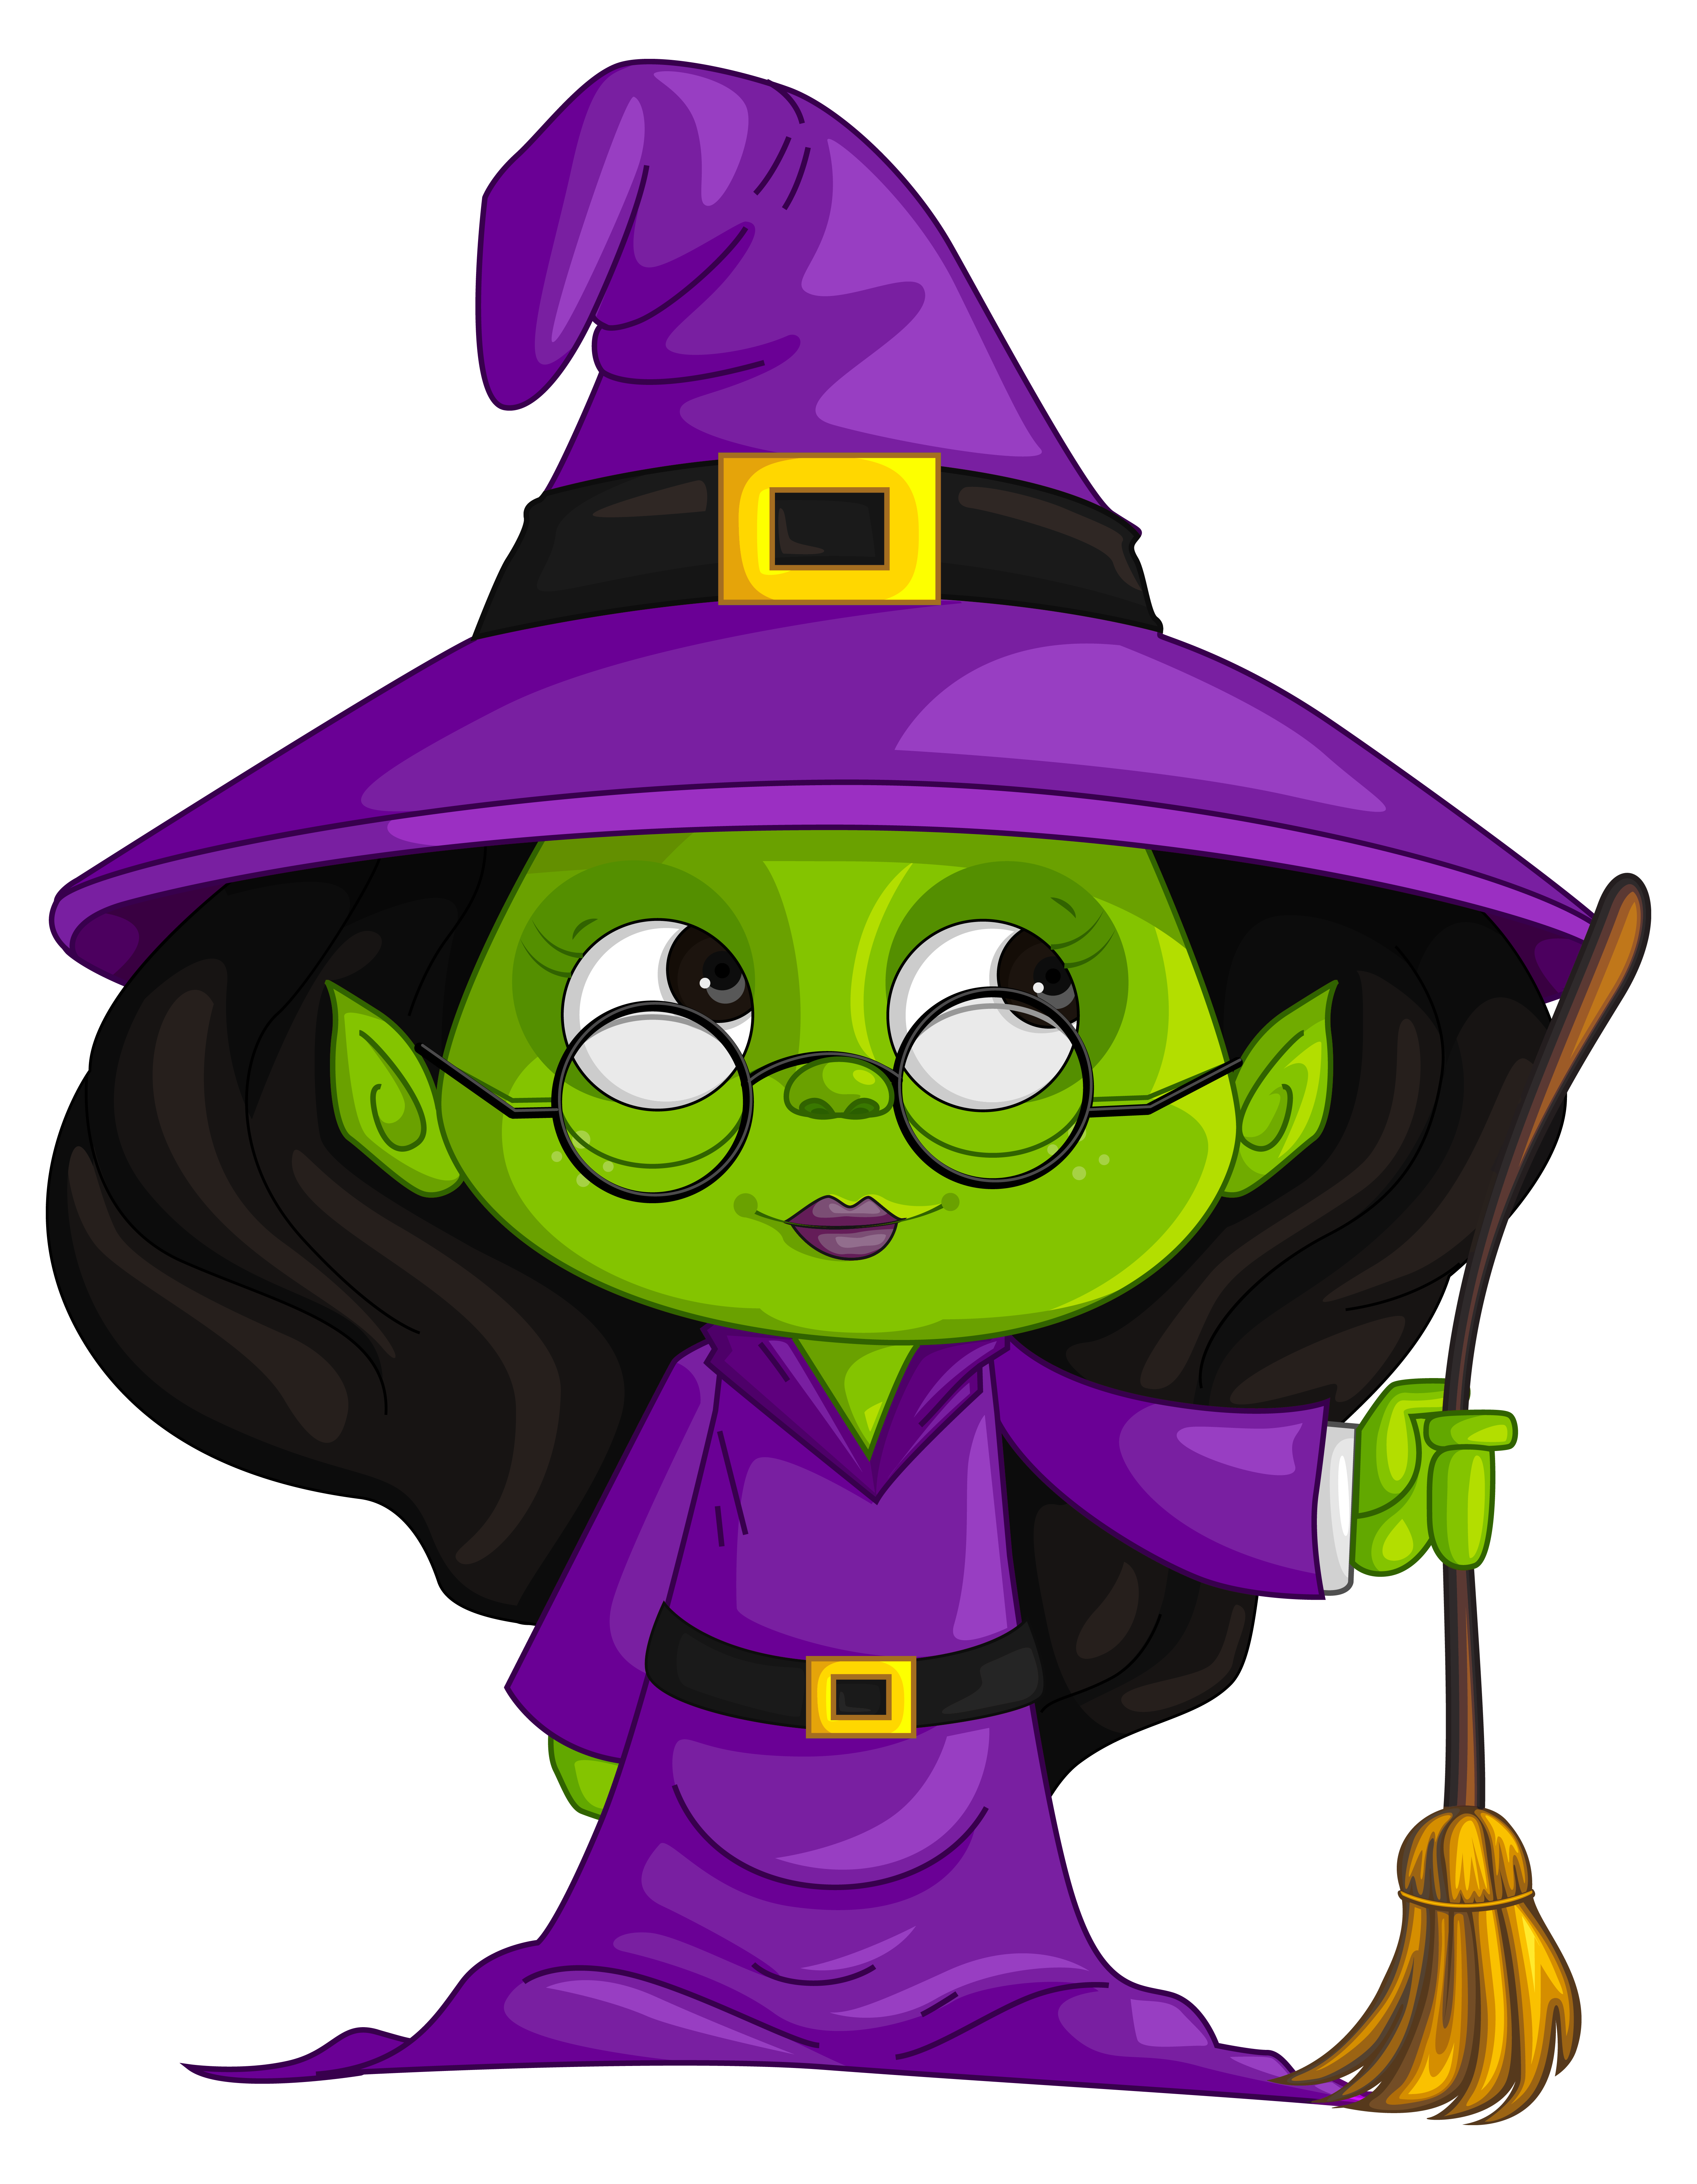 Download Purple Witch Witchcraft Free Clipart HQ HQ PNG Image FreePNGImg.